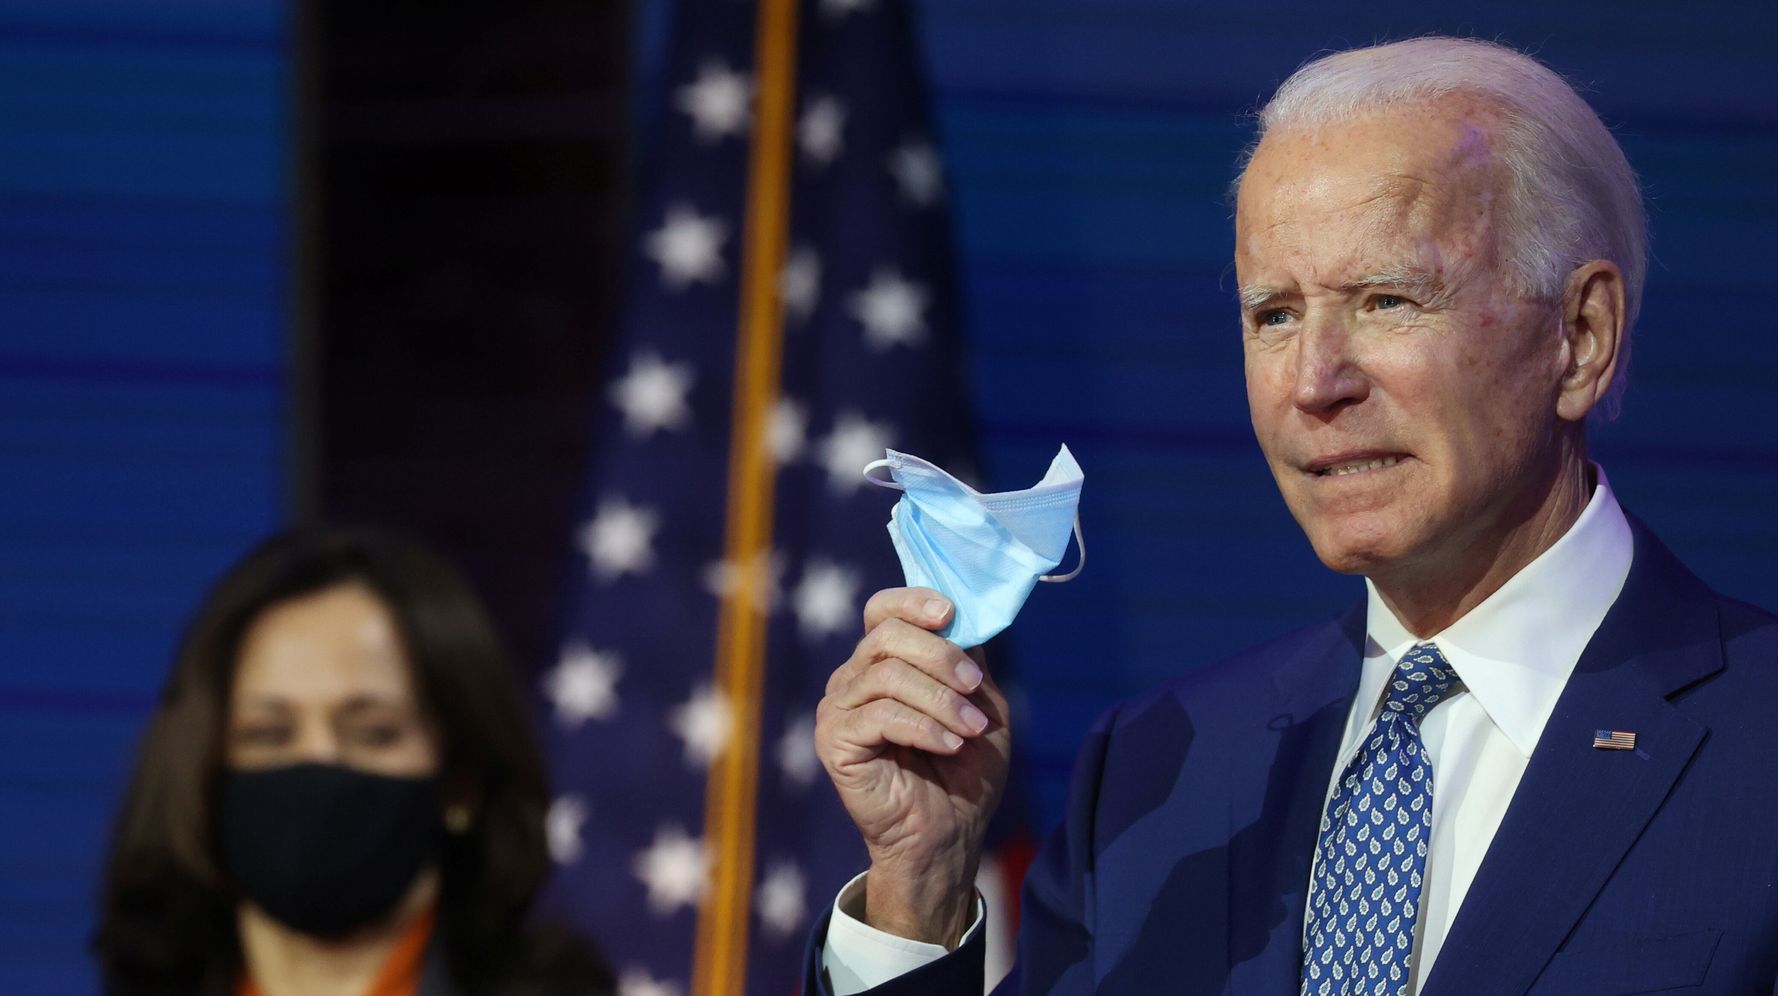 Biden Campaign Considers Legal Action Over Delay In Recognizing Transition